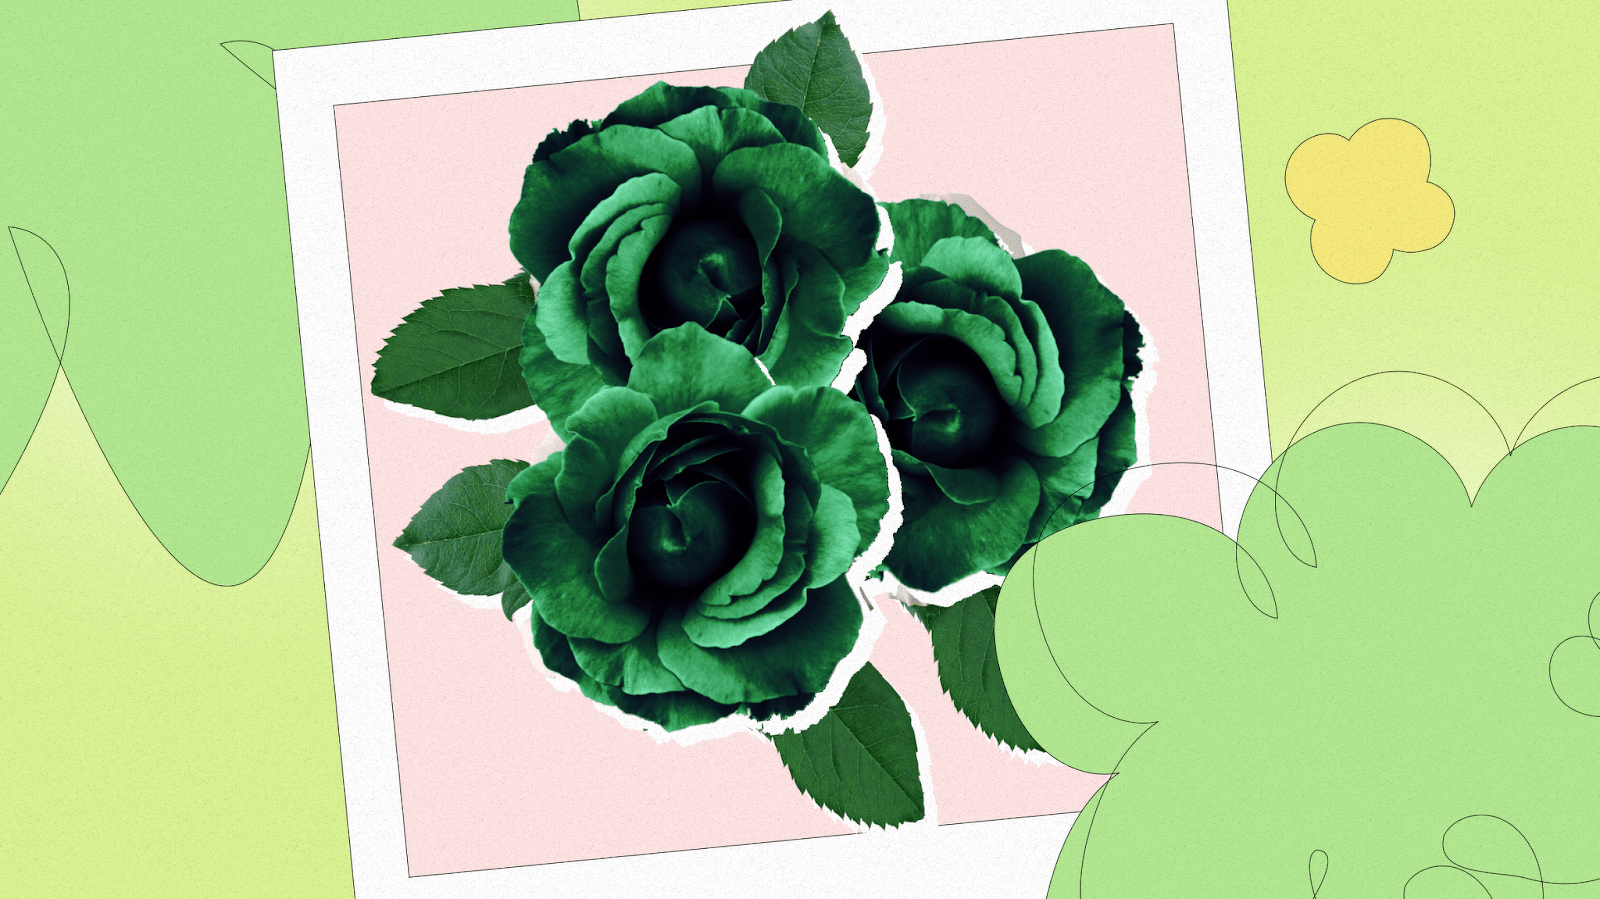 What do green roses mean?